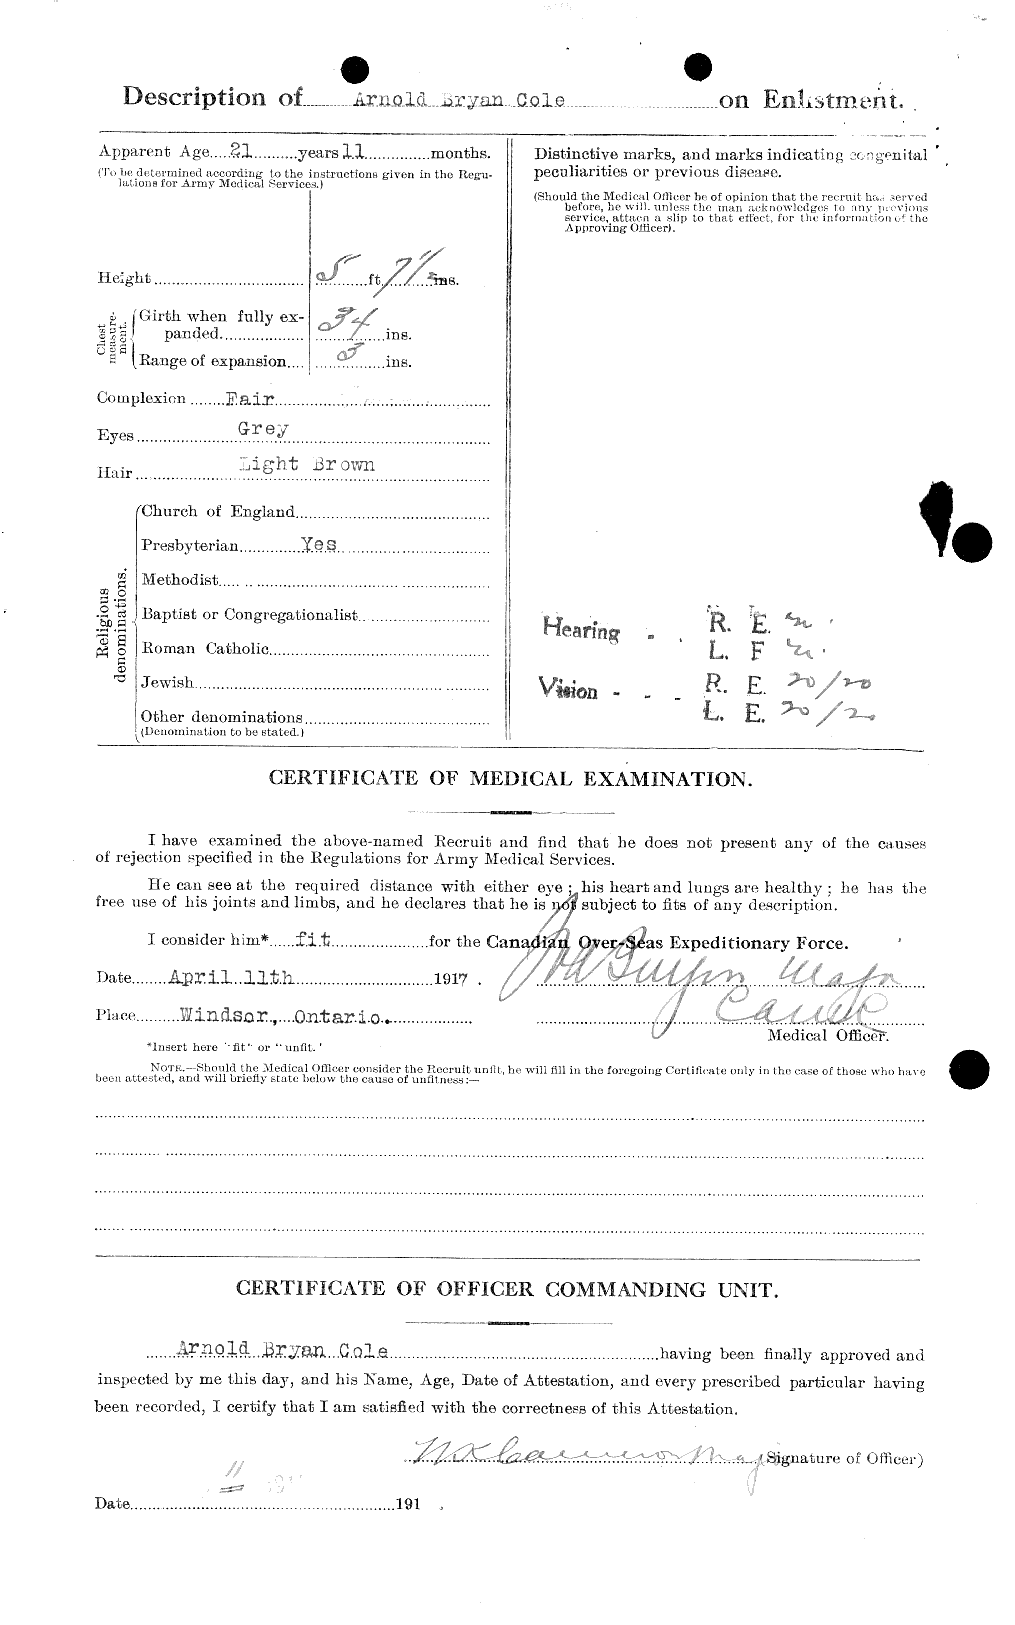 Personnel Records of the First World War - CEF 027594b